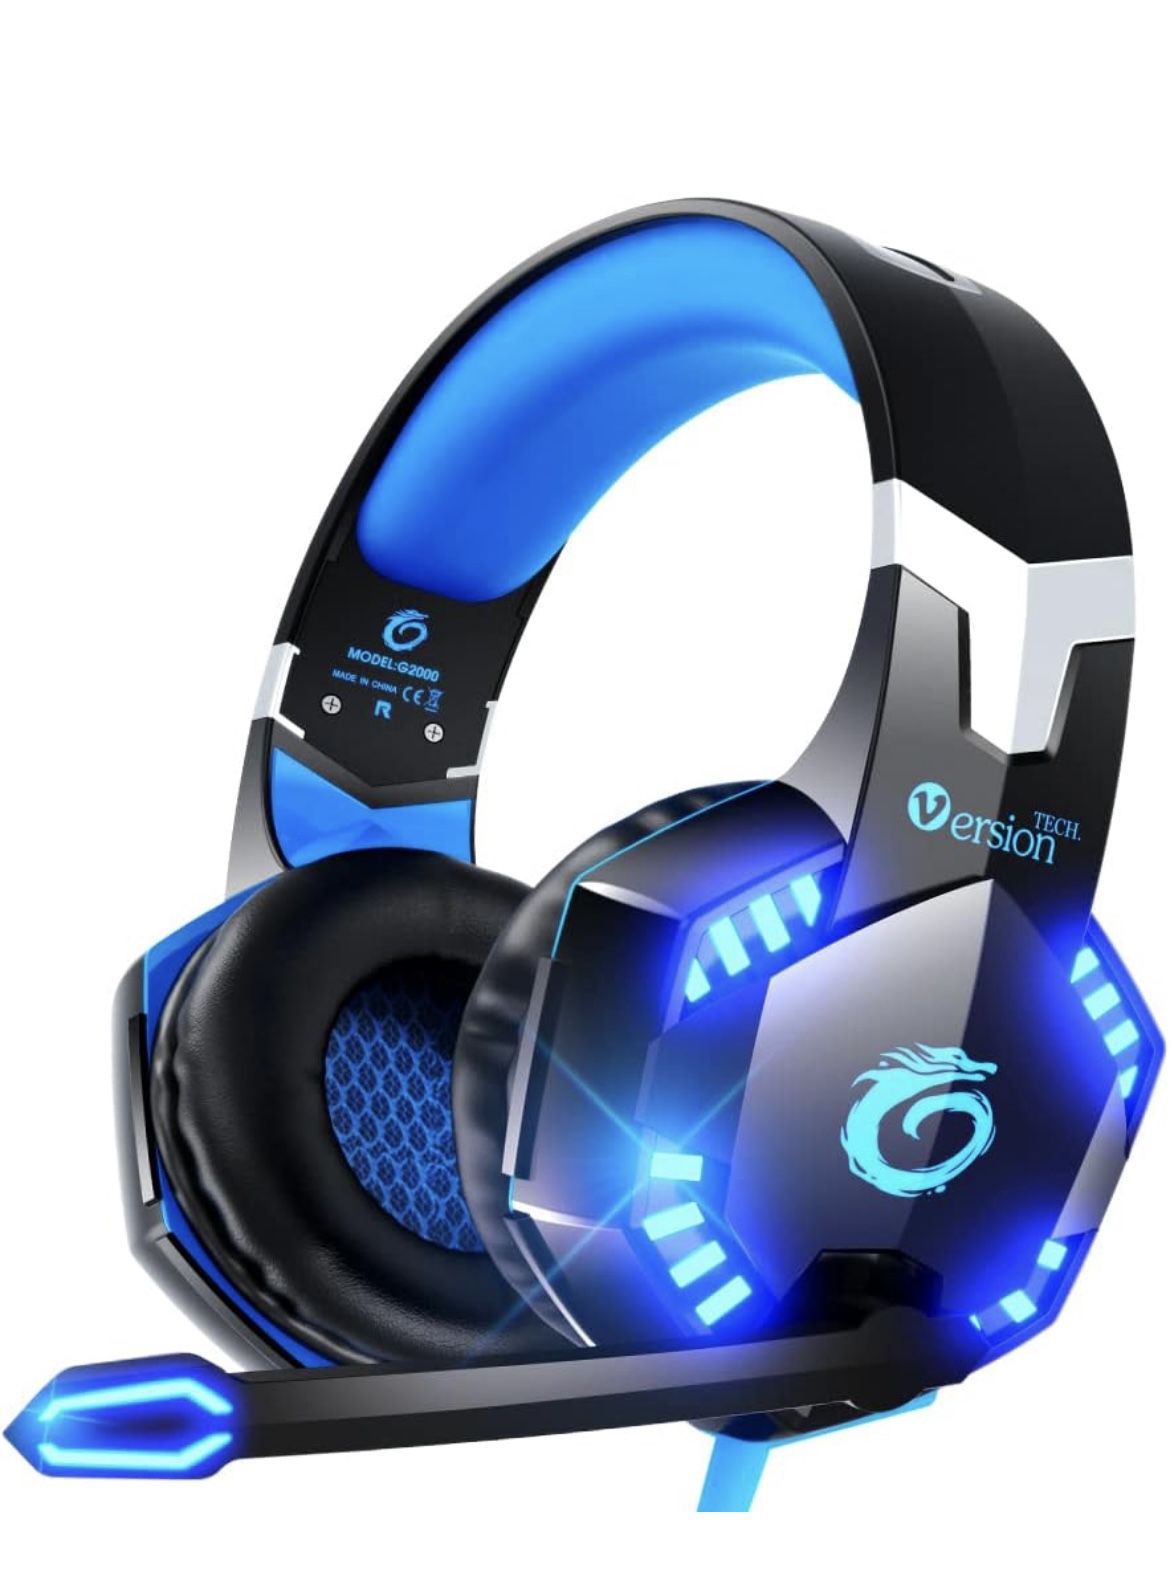 Headphone - Gaming Headset for PS5 PS4 Xbox One Controller,Bass Surround Noise Cancelling Mic, Over Ear Headphones with LED Lights